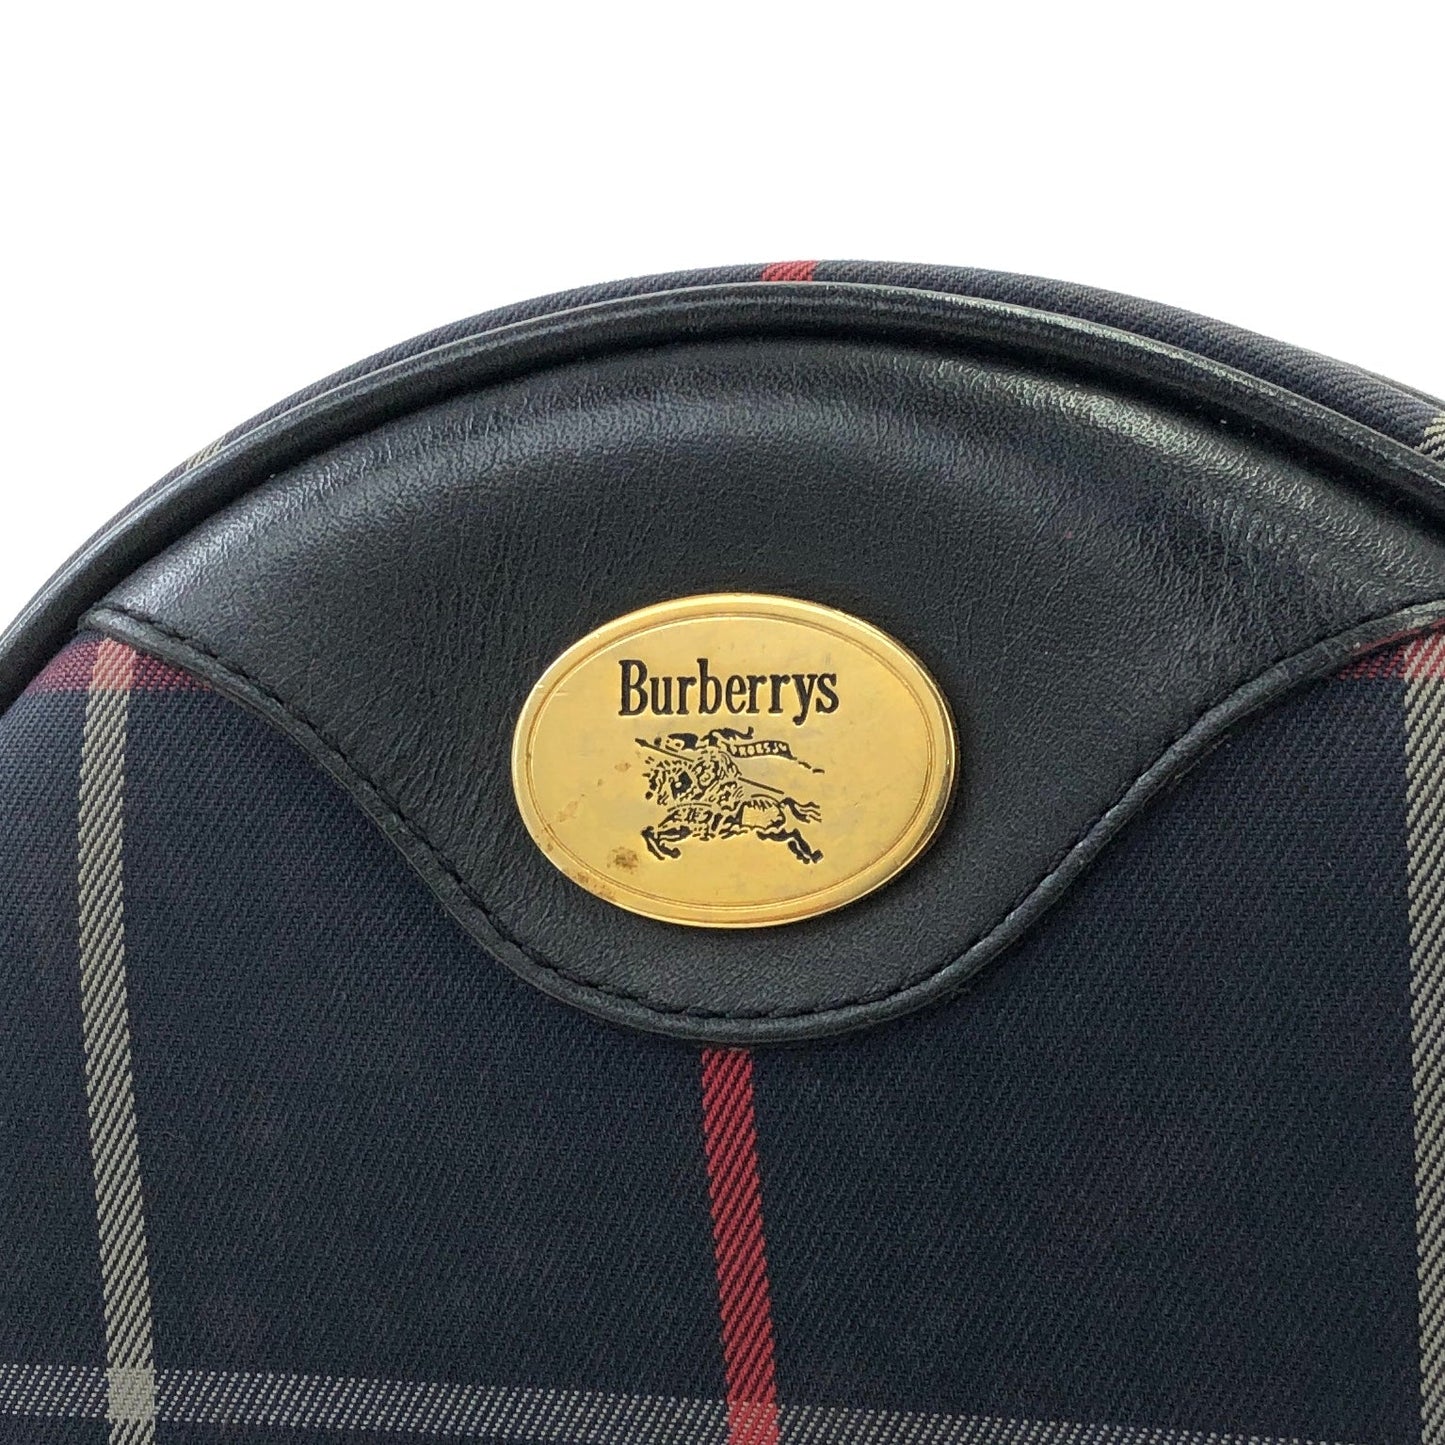 Burberrys Windowpane Check Pattern Round Small Shoulder bag Navy Vintage Old h4xh3h